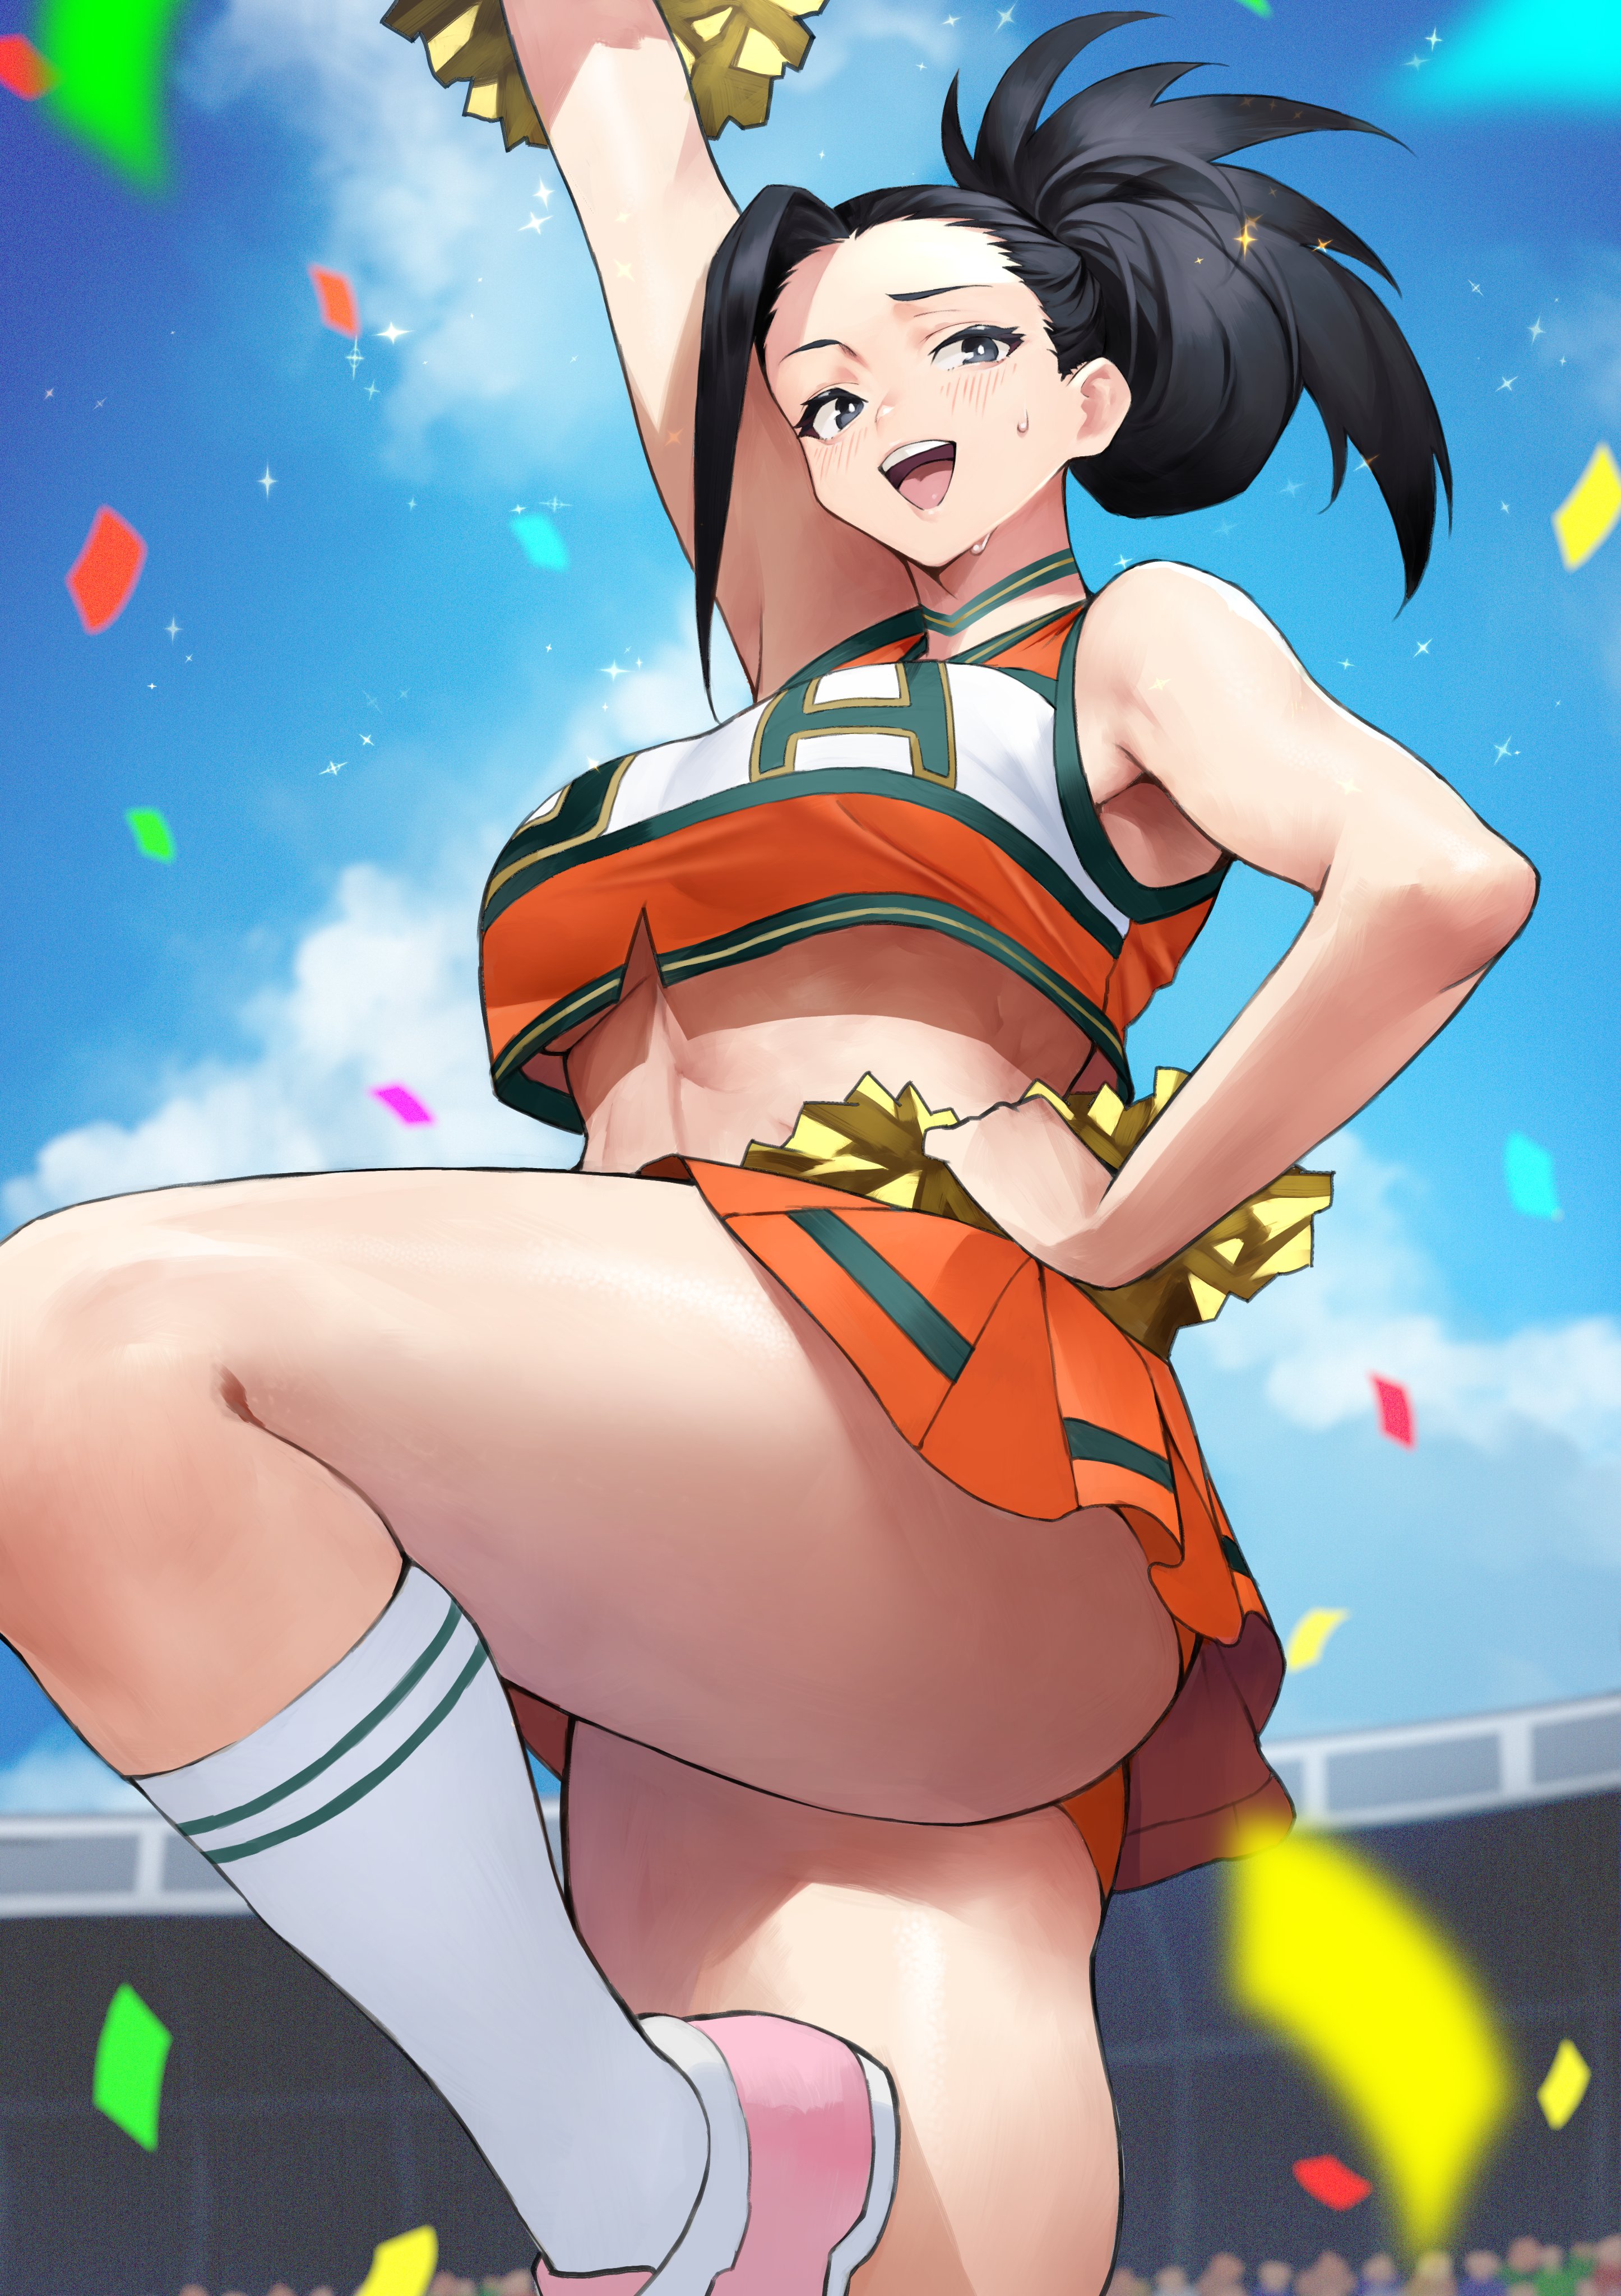  Best sexy anime characters Toned Legs